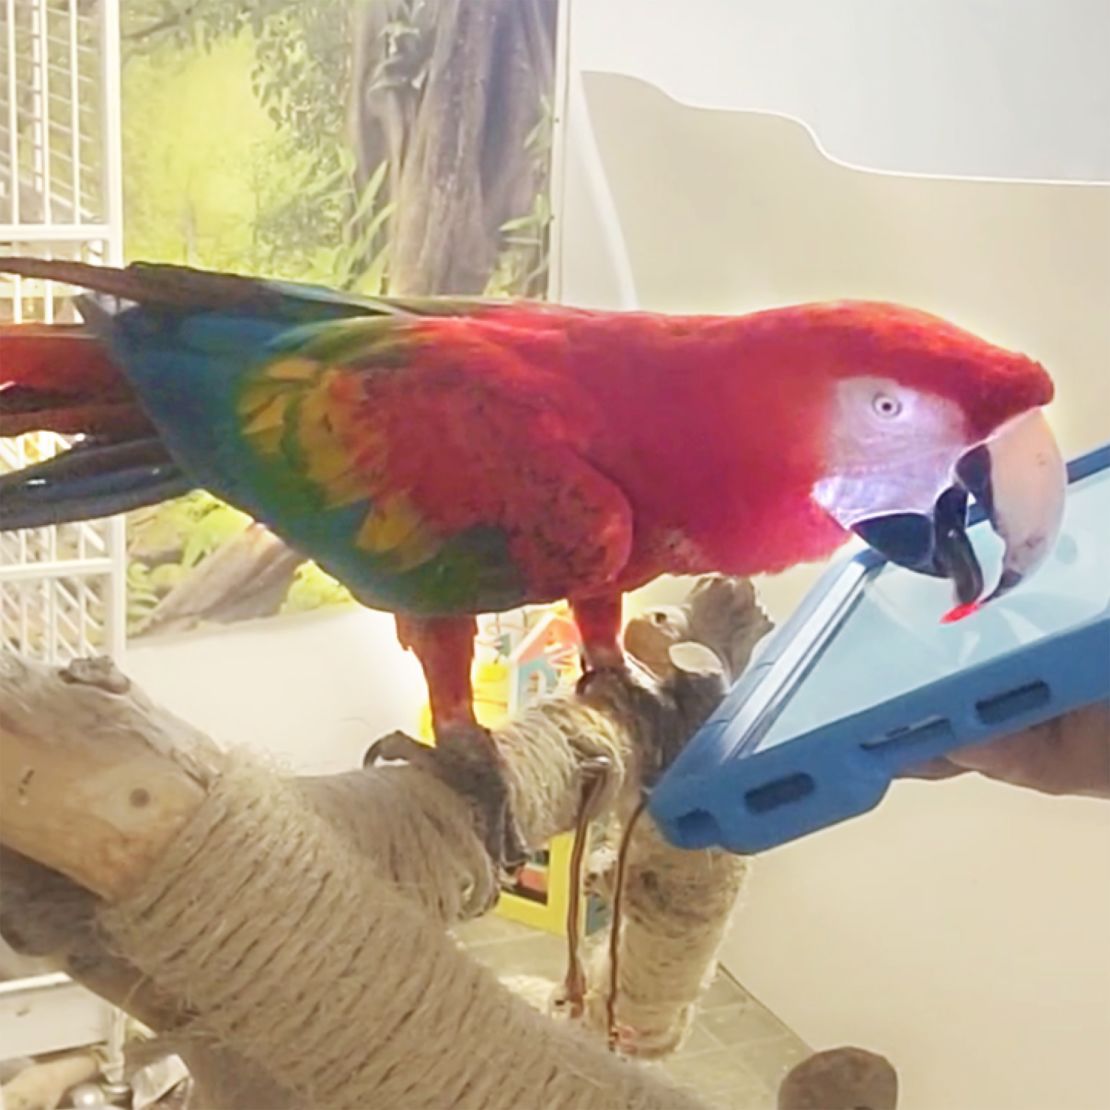 Researchers designed the tablet game to be used by a parrot in collaboration with the bird's caretaker.